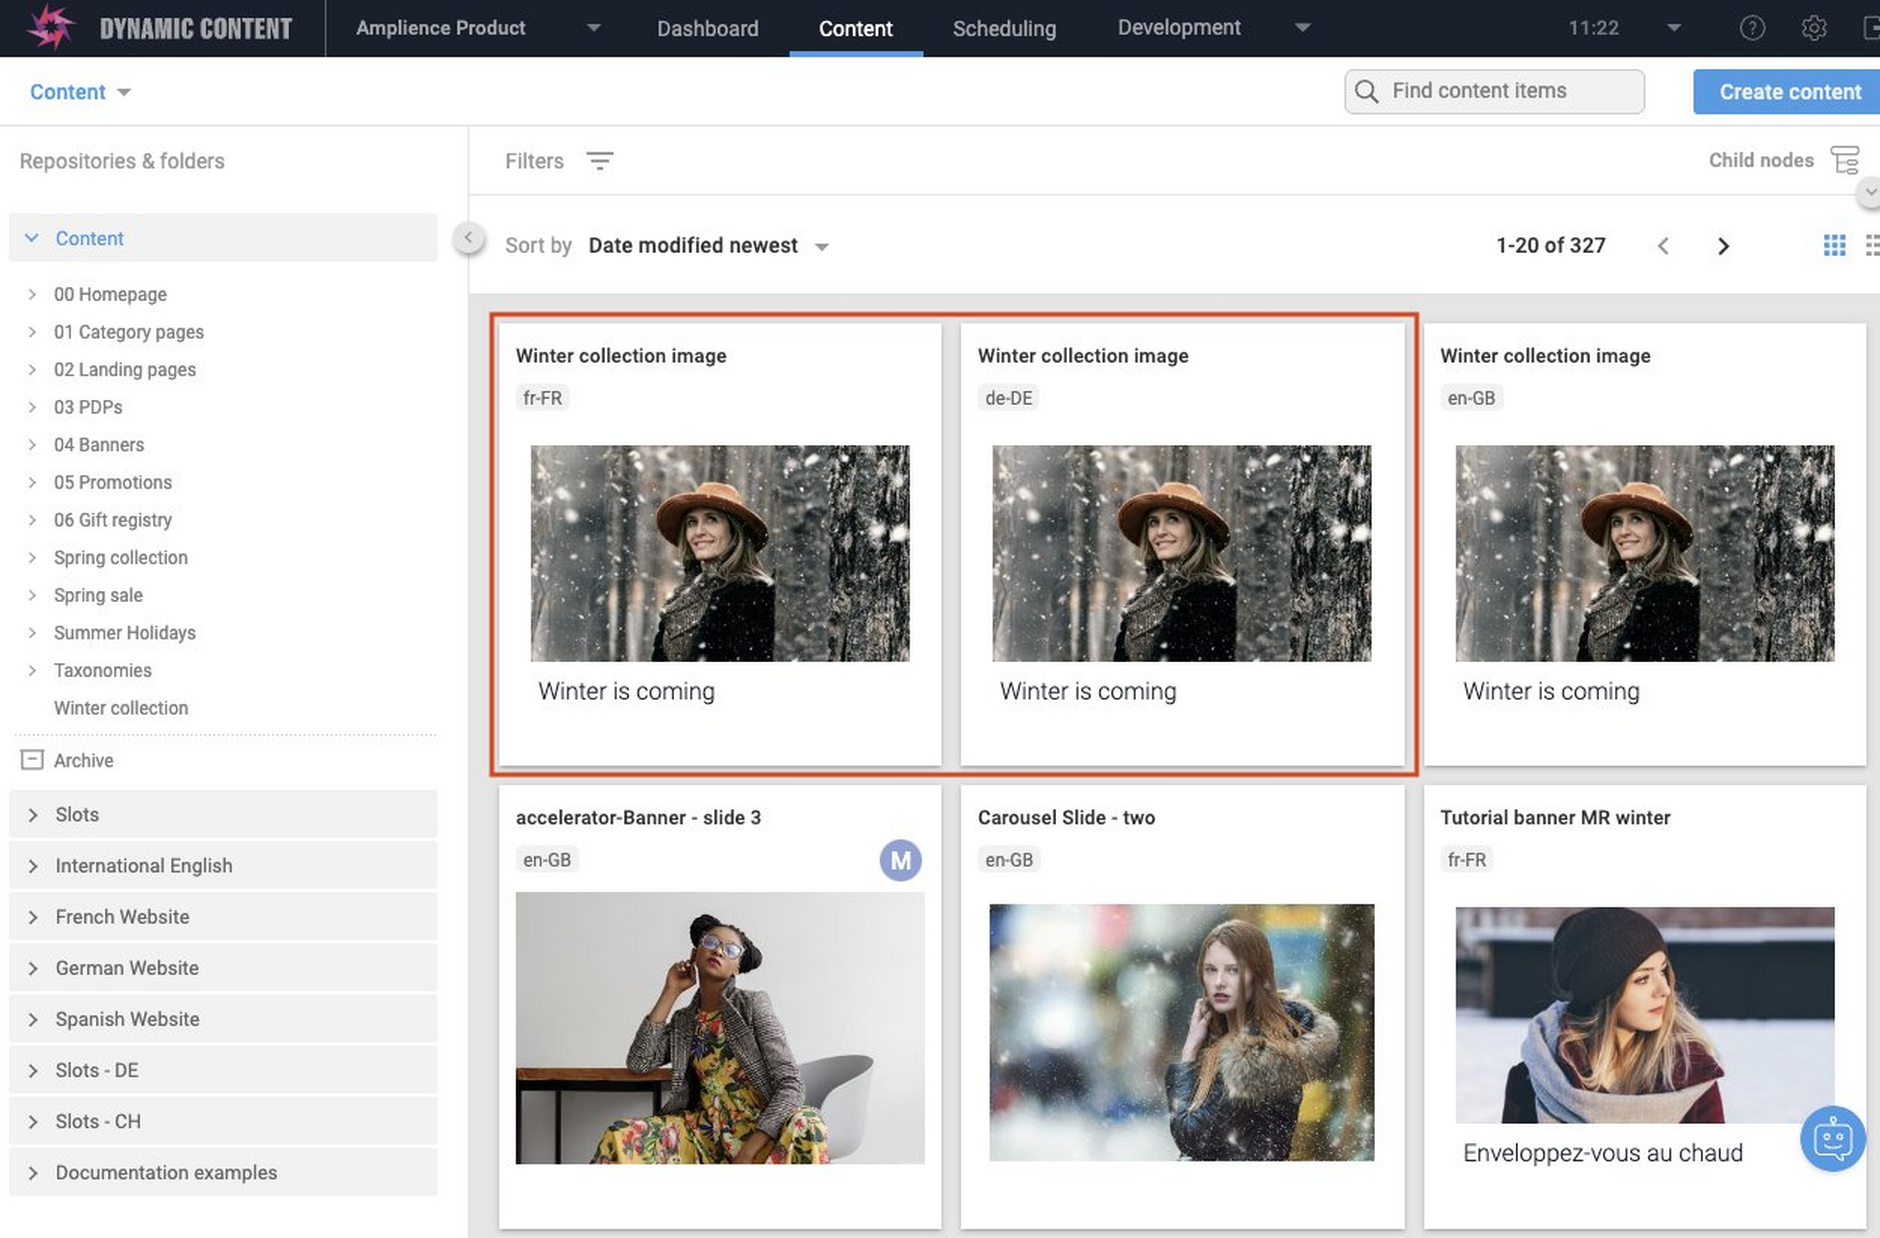 Localized variants of the Winter collection image shown in the Content Library